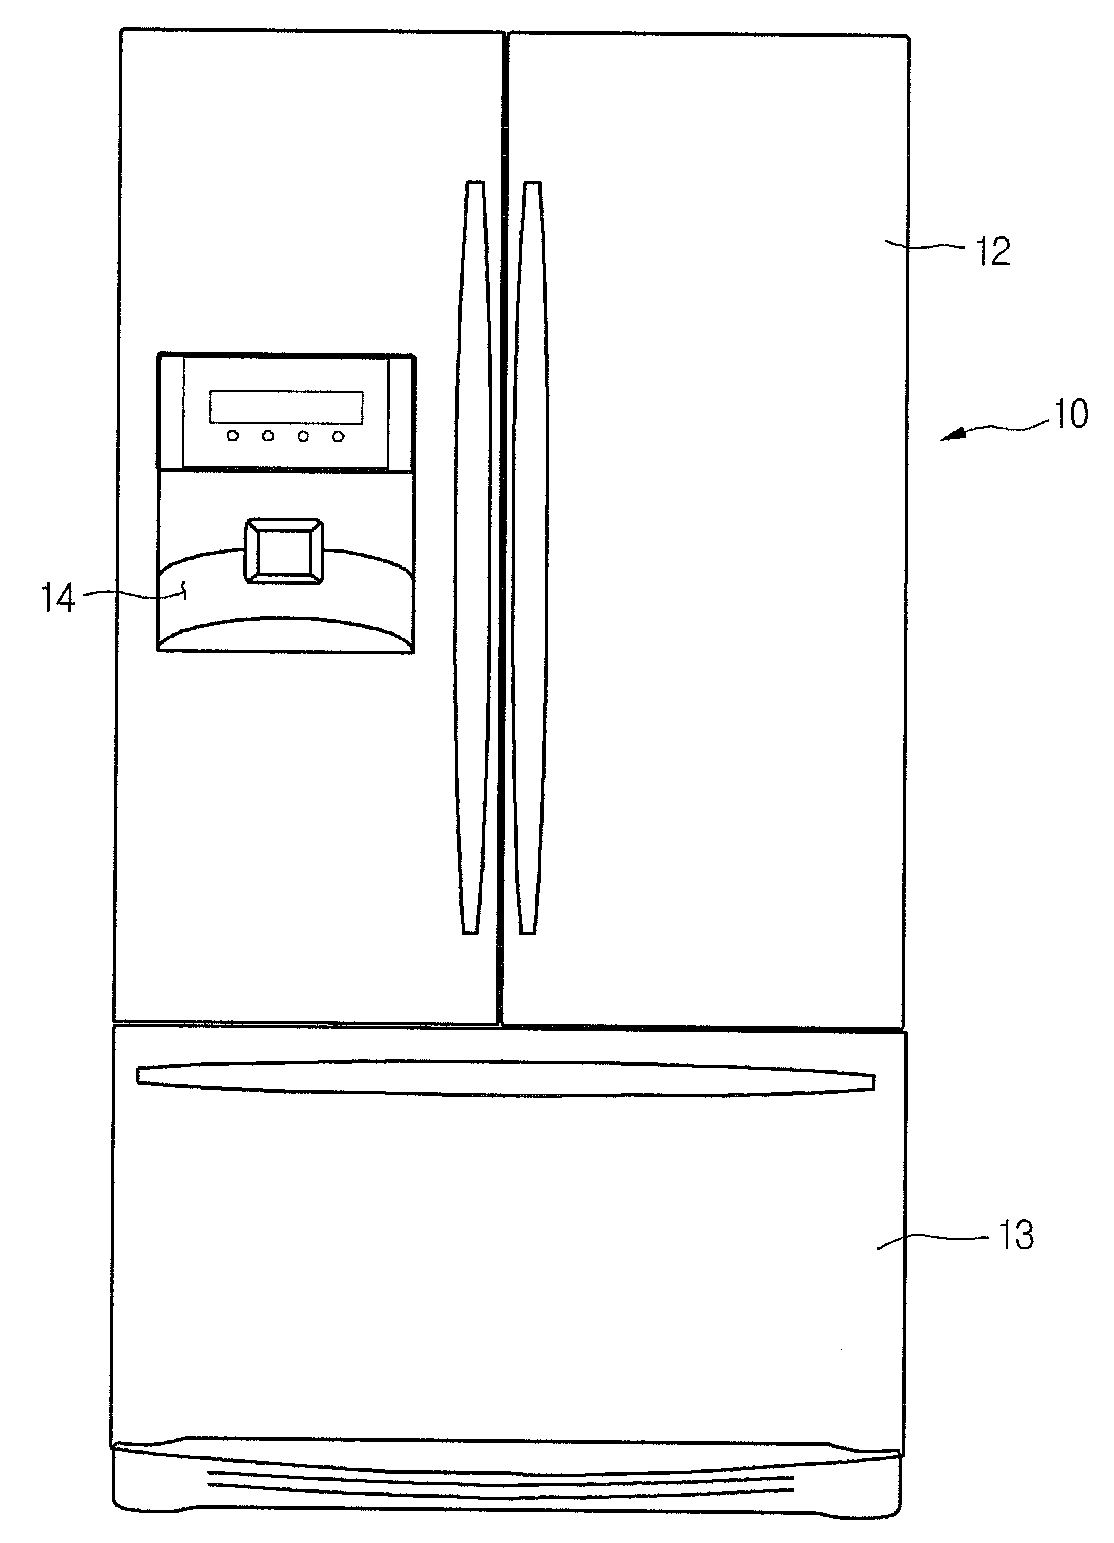 System and method for making ice